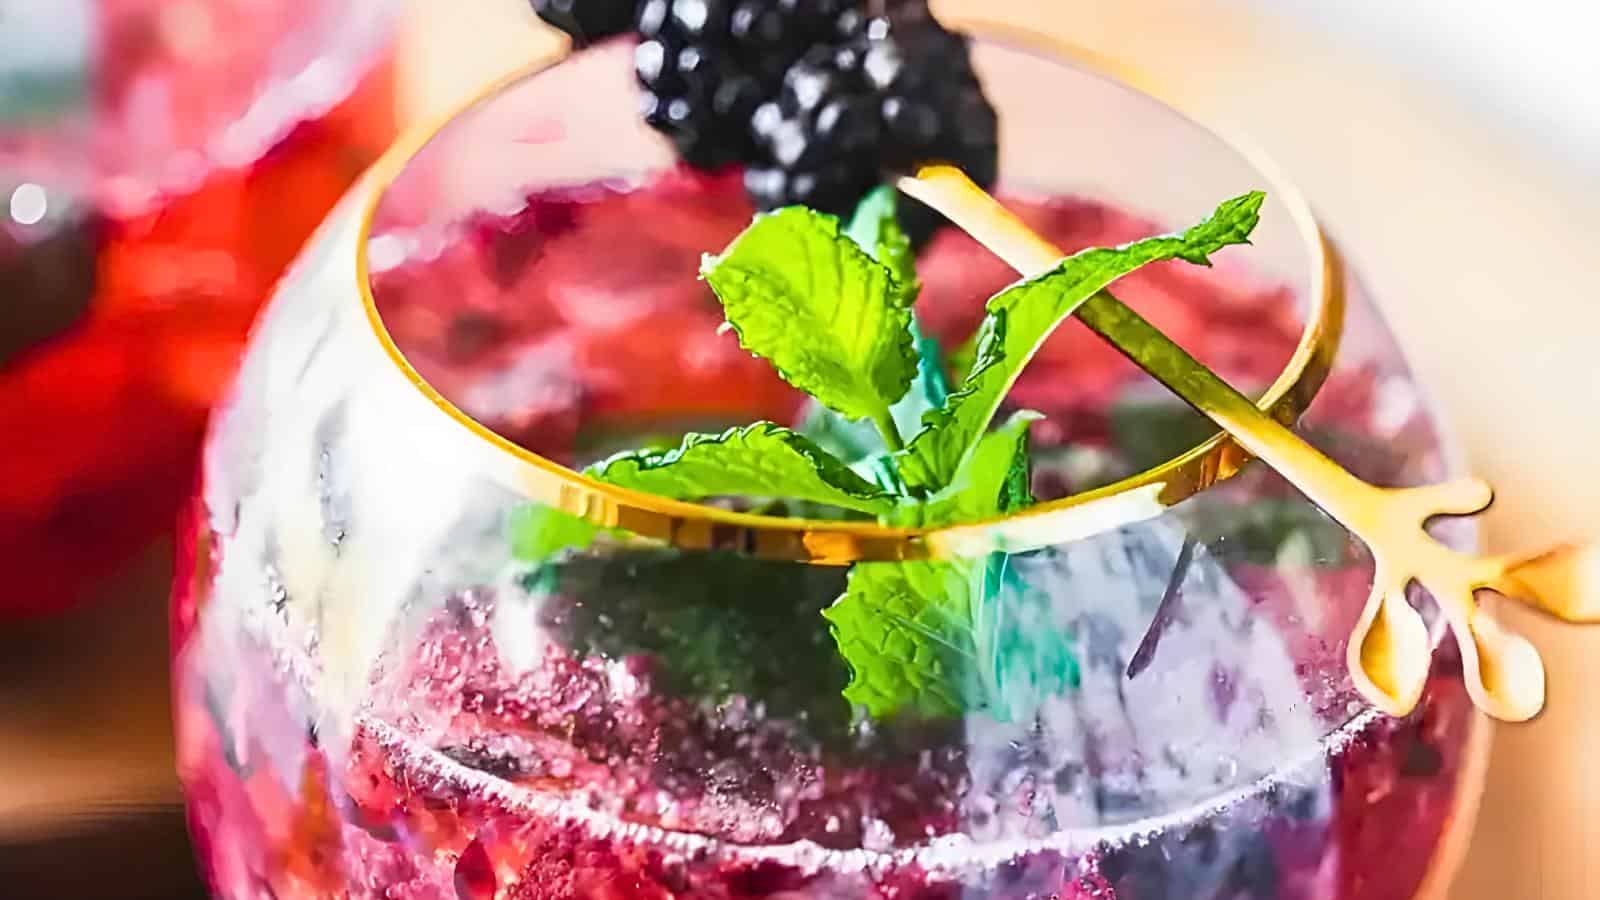 <p>The Blackberry Bourbon Smash is a perfect blend of sweet and strong. Fresh blackberries, mint, and bourbon come together in this easy-to-drink summer cocktail. Serve over ice for a cooling treat.<br><strong>Get the Recipe: </strong><a href="https://www.sweetteaandthyme.com/blackberry-bourbon-smash-cocktail/?utm_source=msn&utm_medium=page&utm_campaign=msn" rel="noopener">Blackberry Bourbon Smash</a></p>